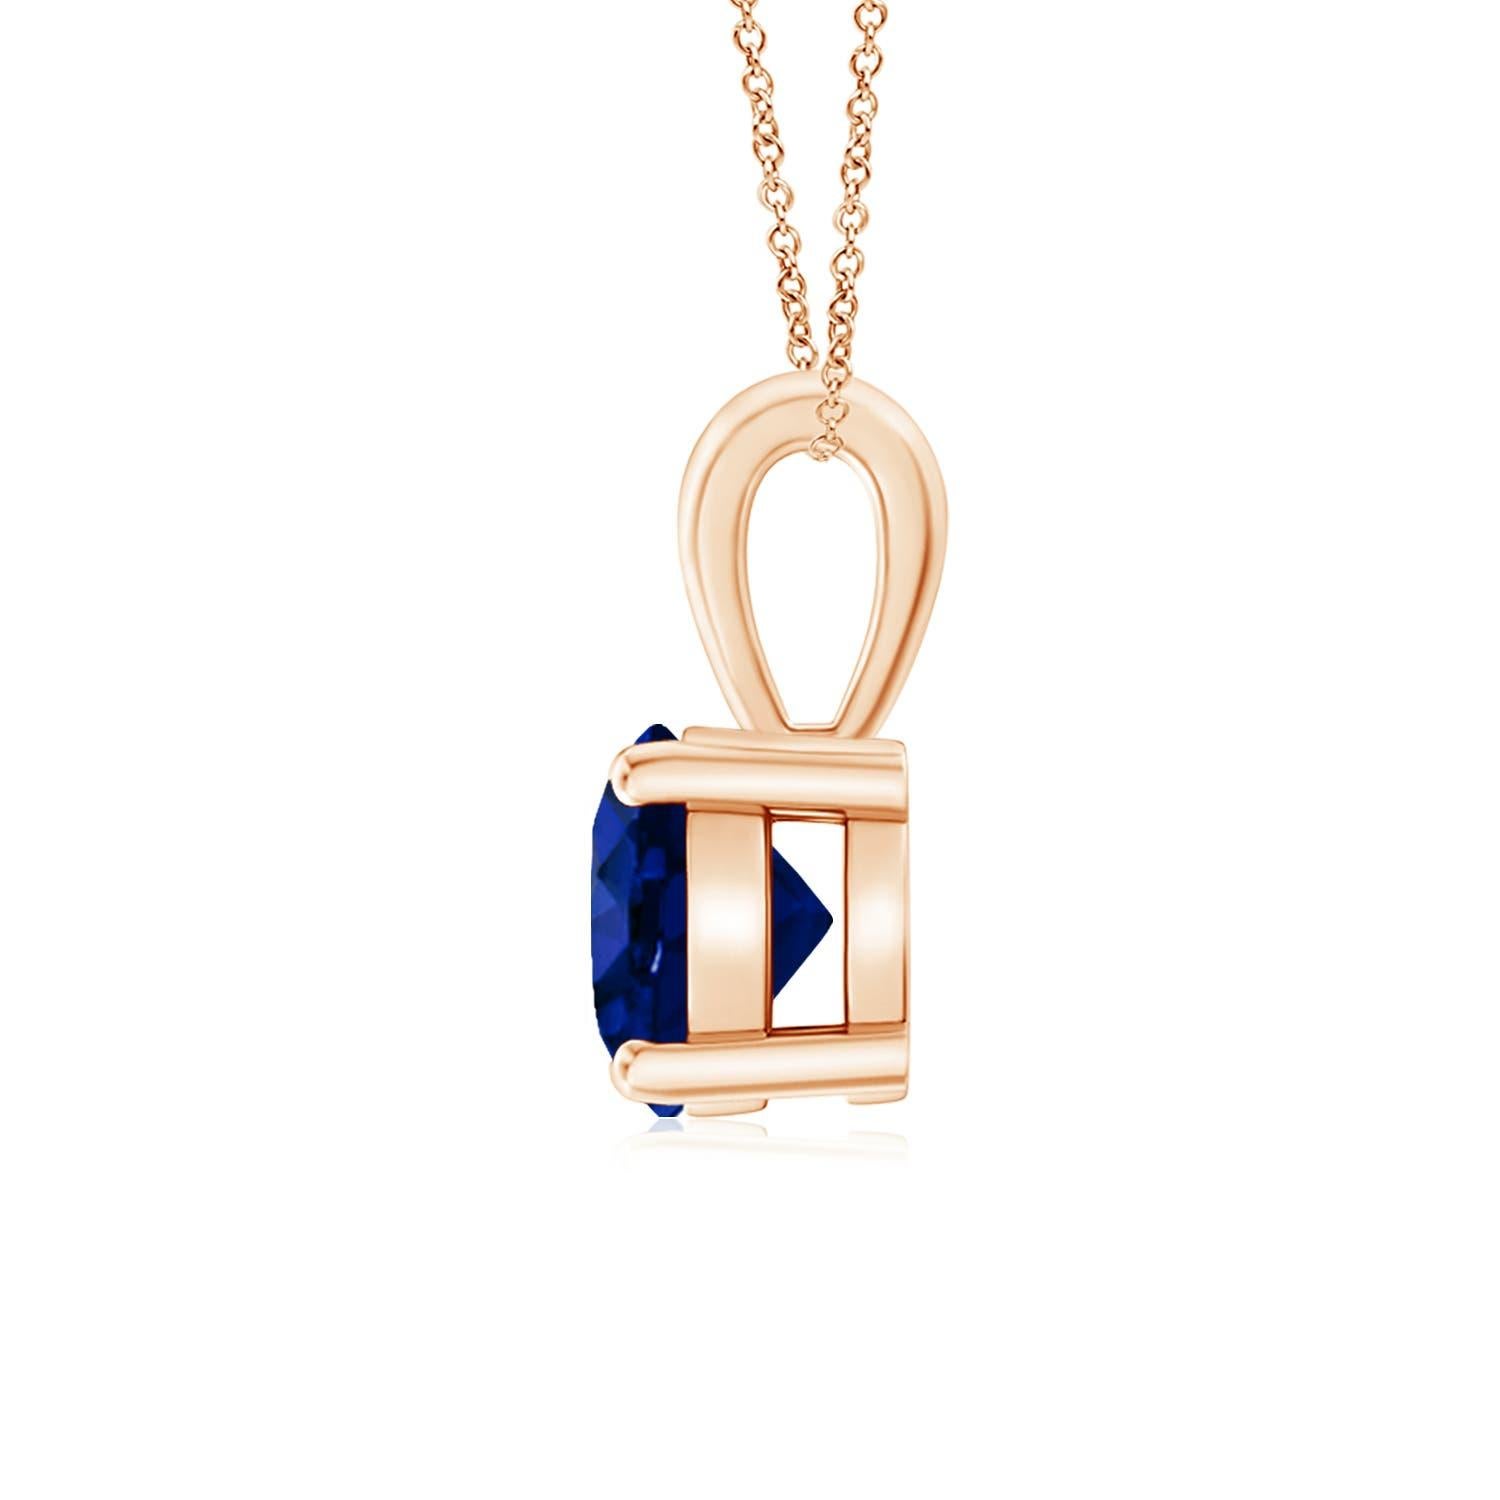 Drawing attention with its gorgeous hue and remarkable sheen is a GIA certified blue sapphire. The round sapphire is linked to a gleaming metal bale. Crafted in 14k rose gold, this prong-set sapphire solitaire pendant is simply alluring.
